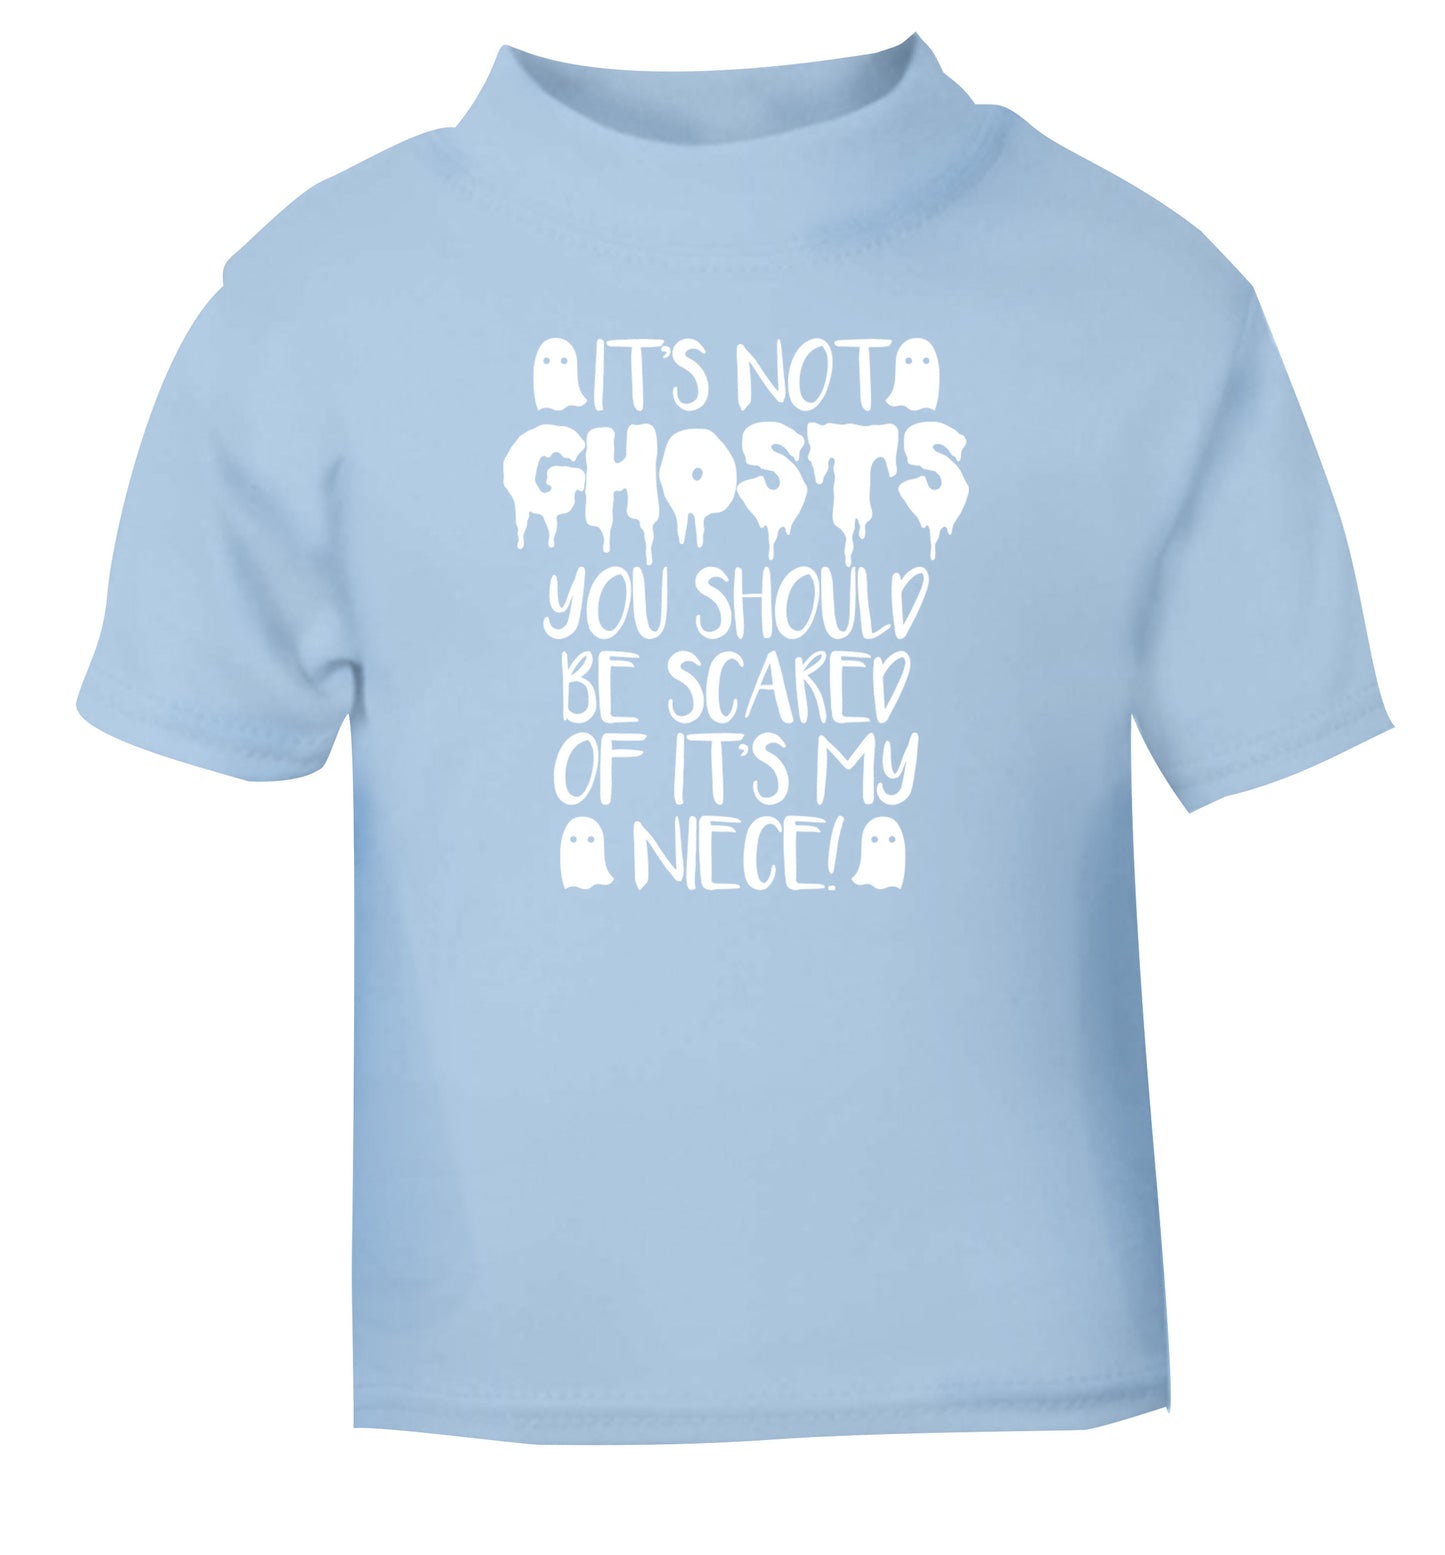 It's not ghosts you should be scared of it's my niece! light blue Baby Toddler Tshirt 2 Years